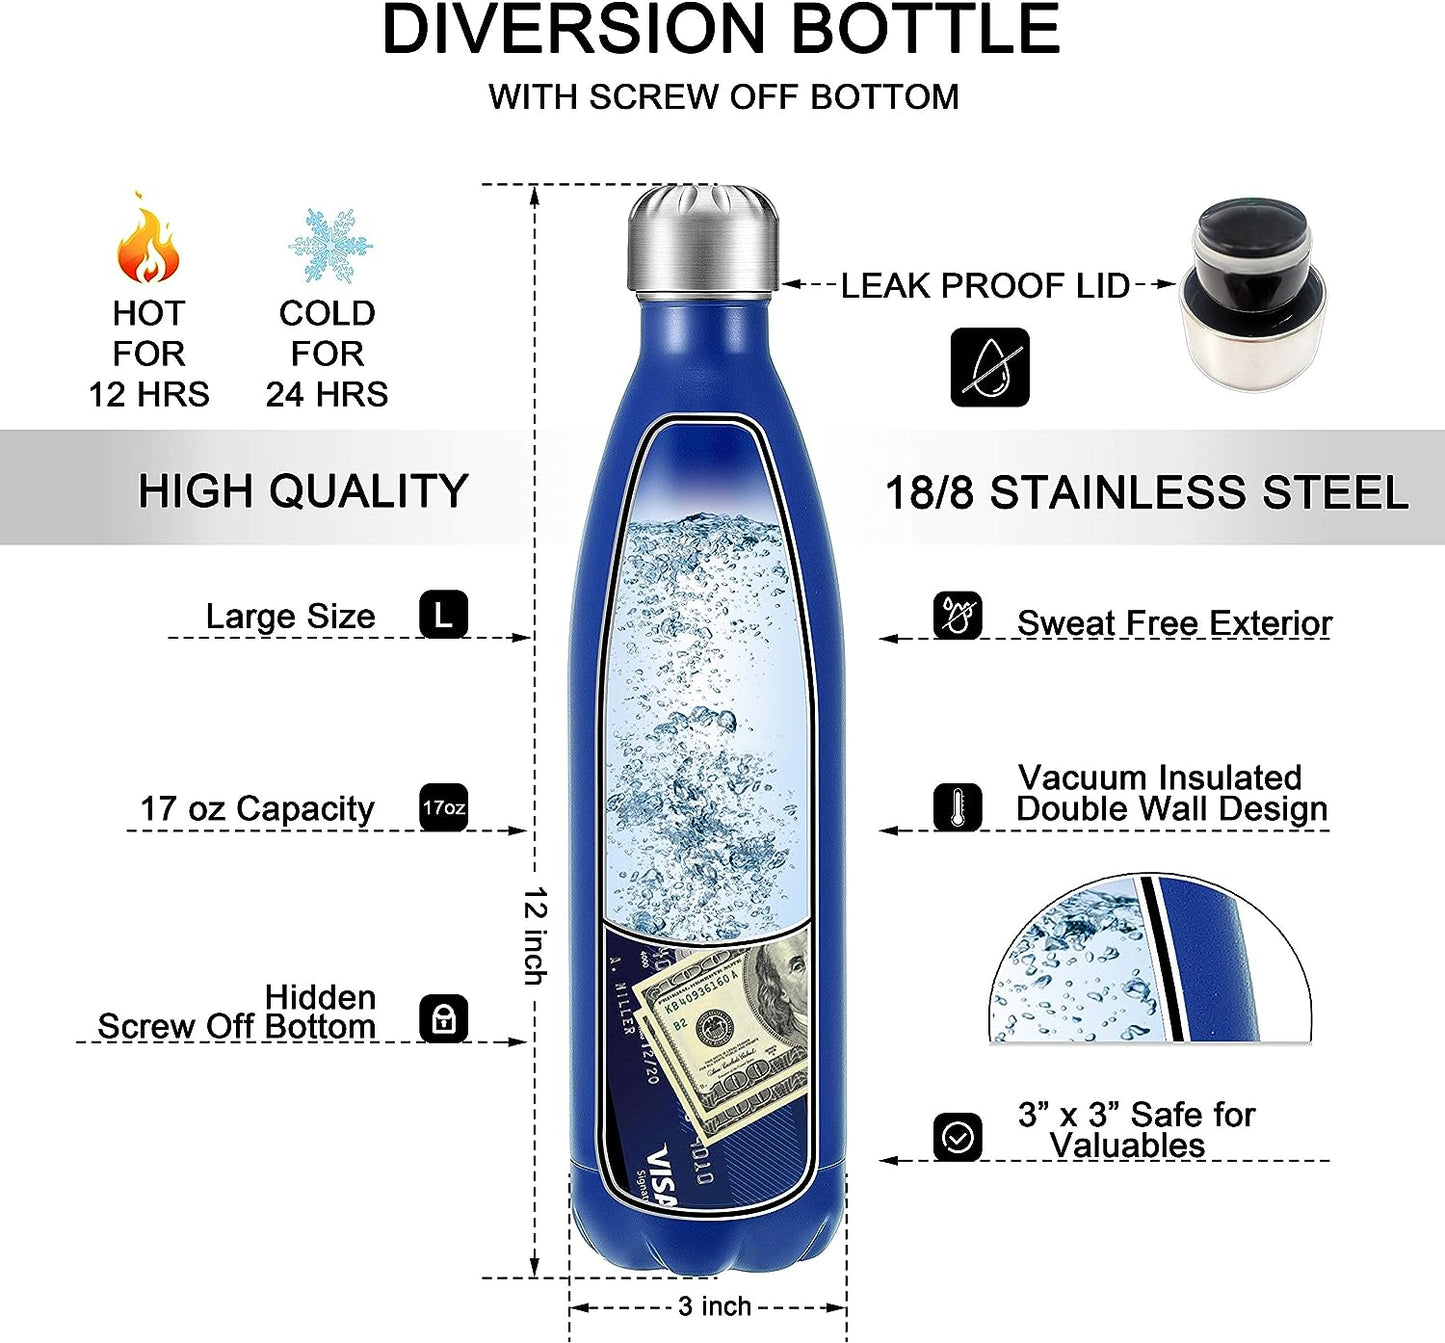 NOTABLE Diversion Safe Water Bottle for Money Keychain Car Key Cash Valuables - Stainless Steel Insulated - Dark Blue